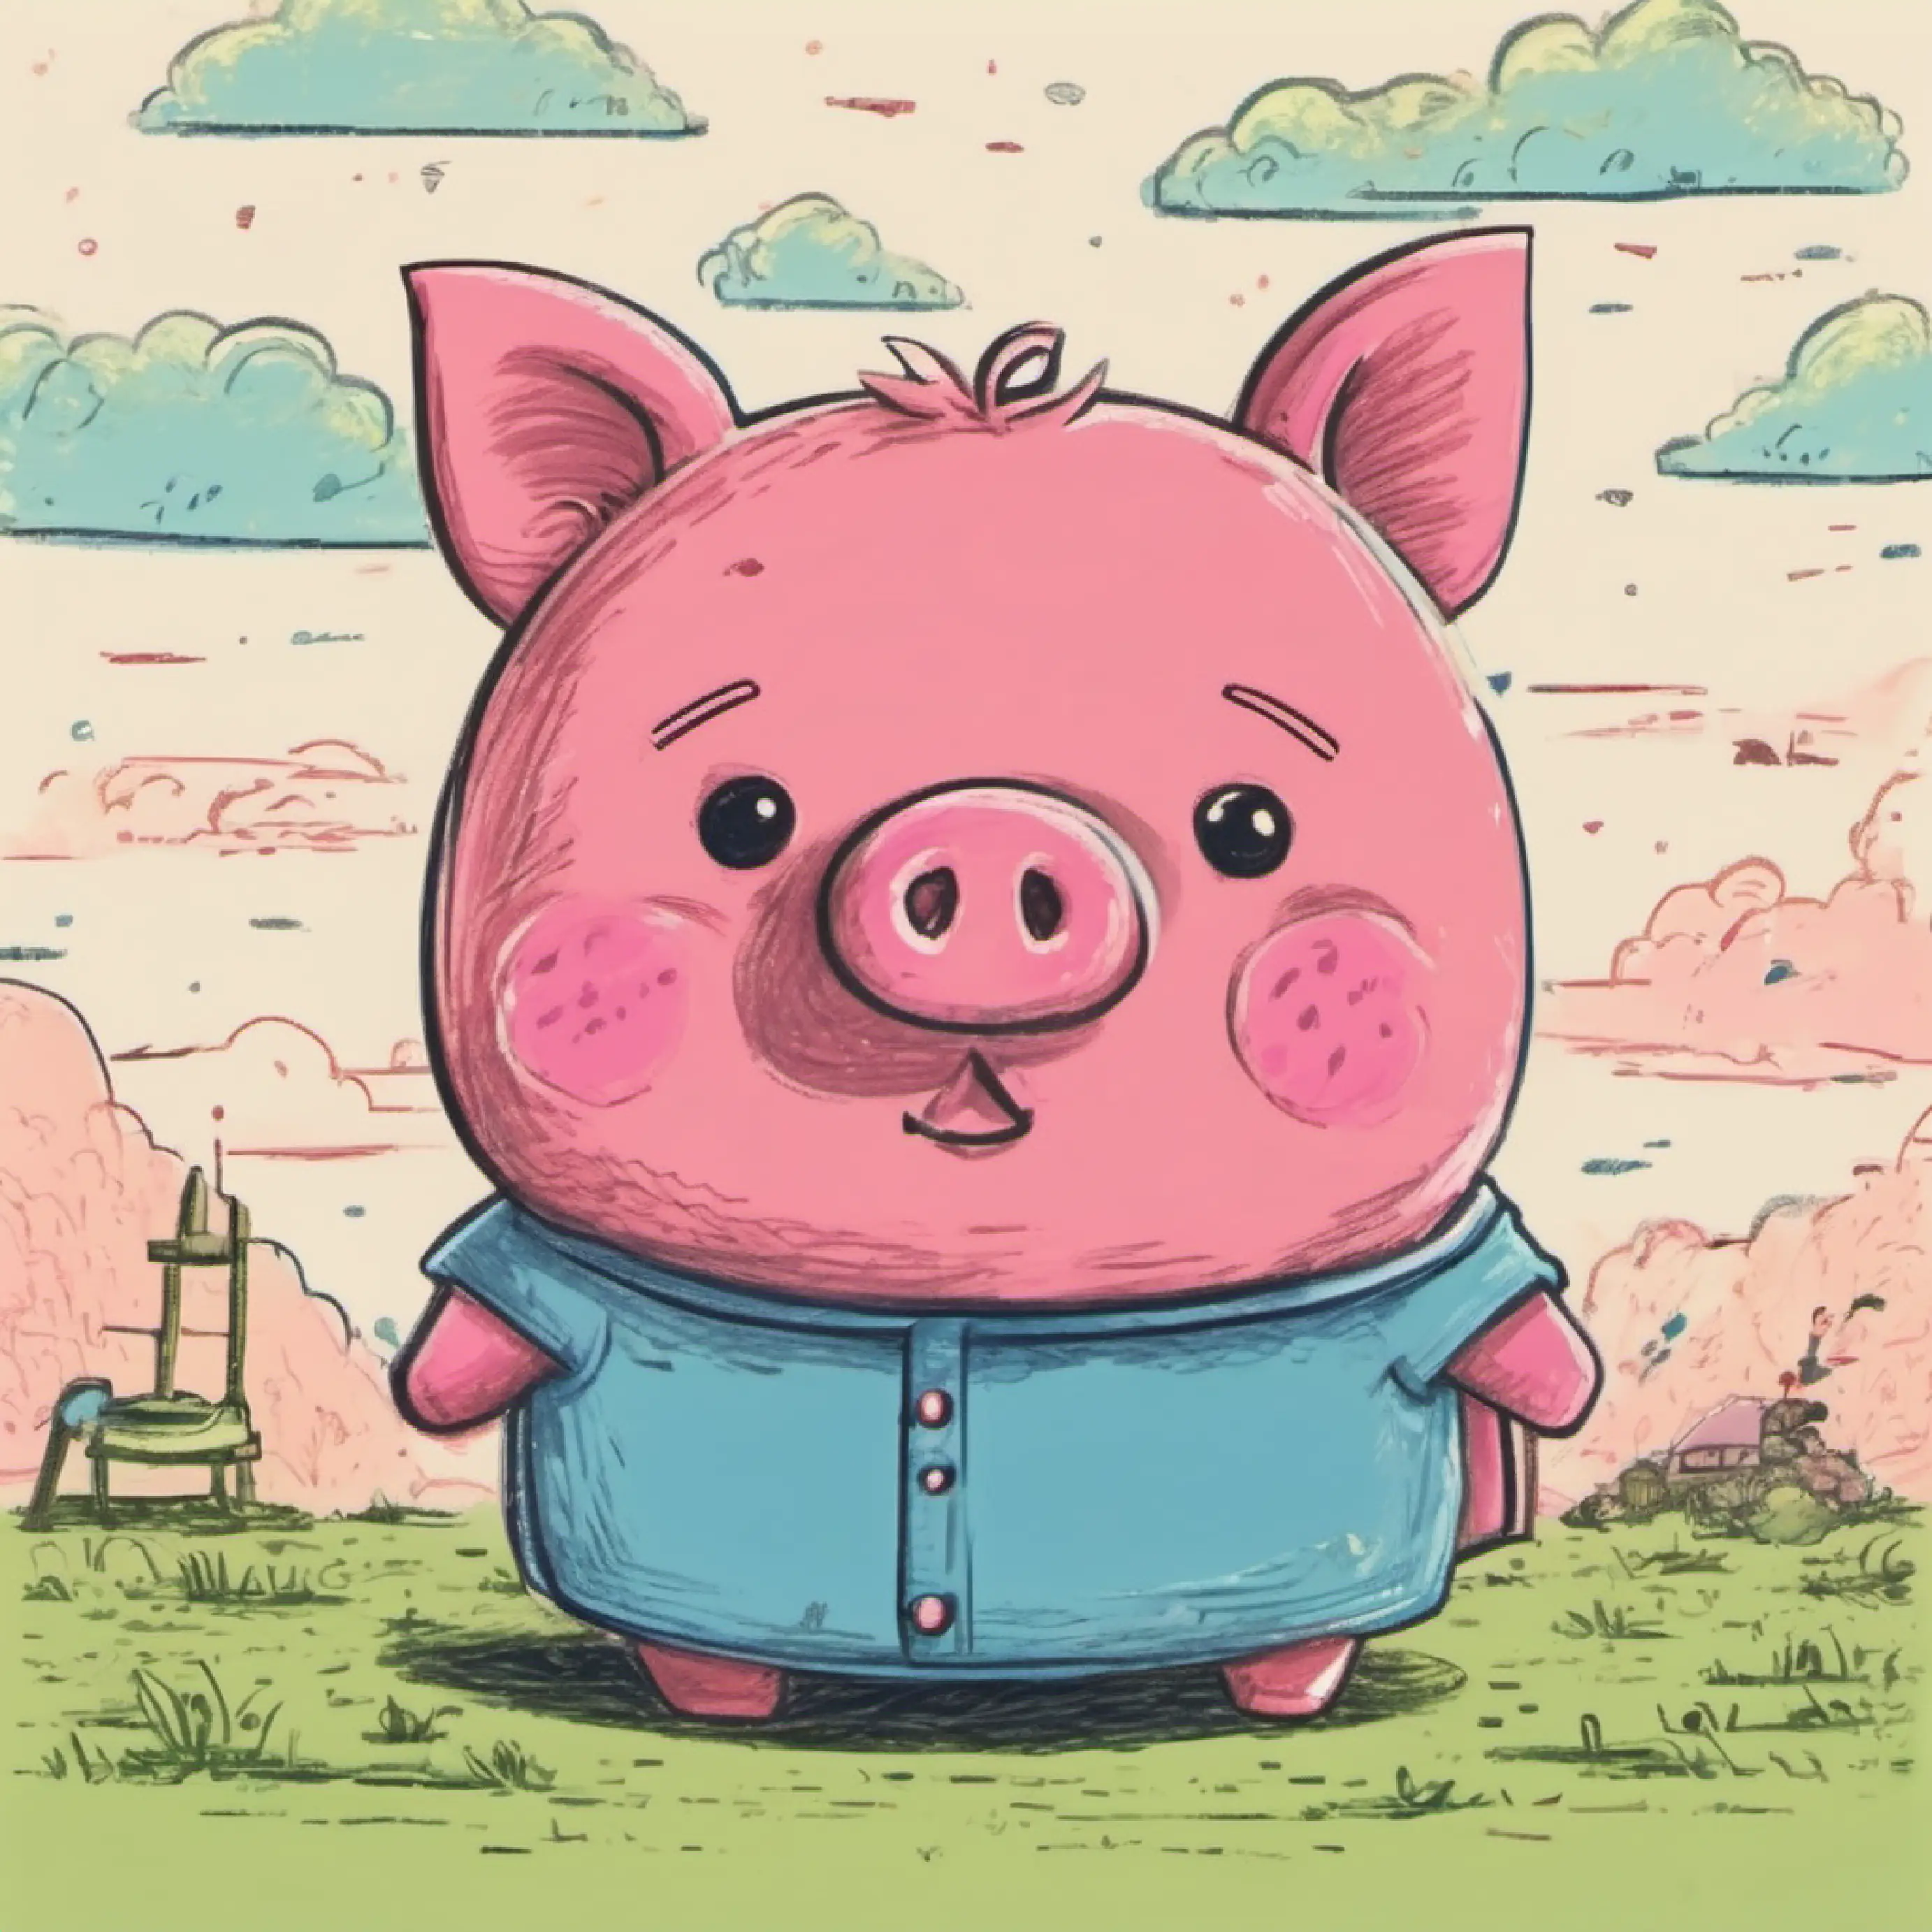 Piggy gets hurt and is alone.